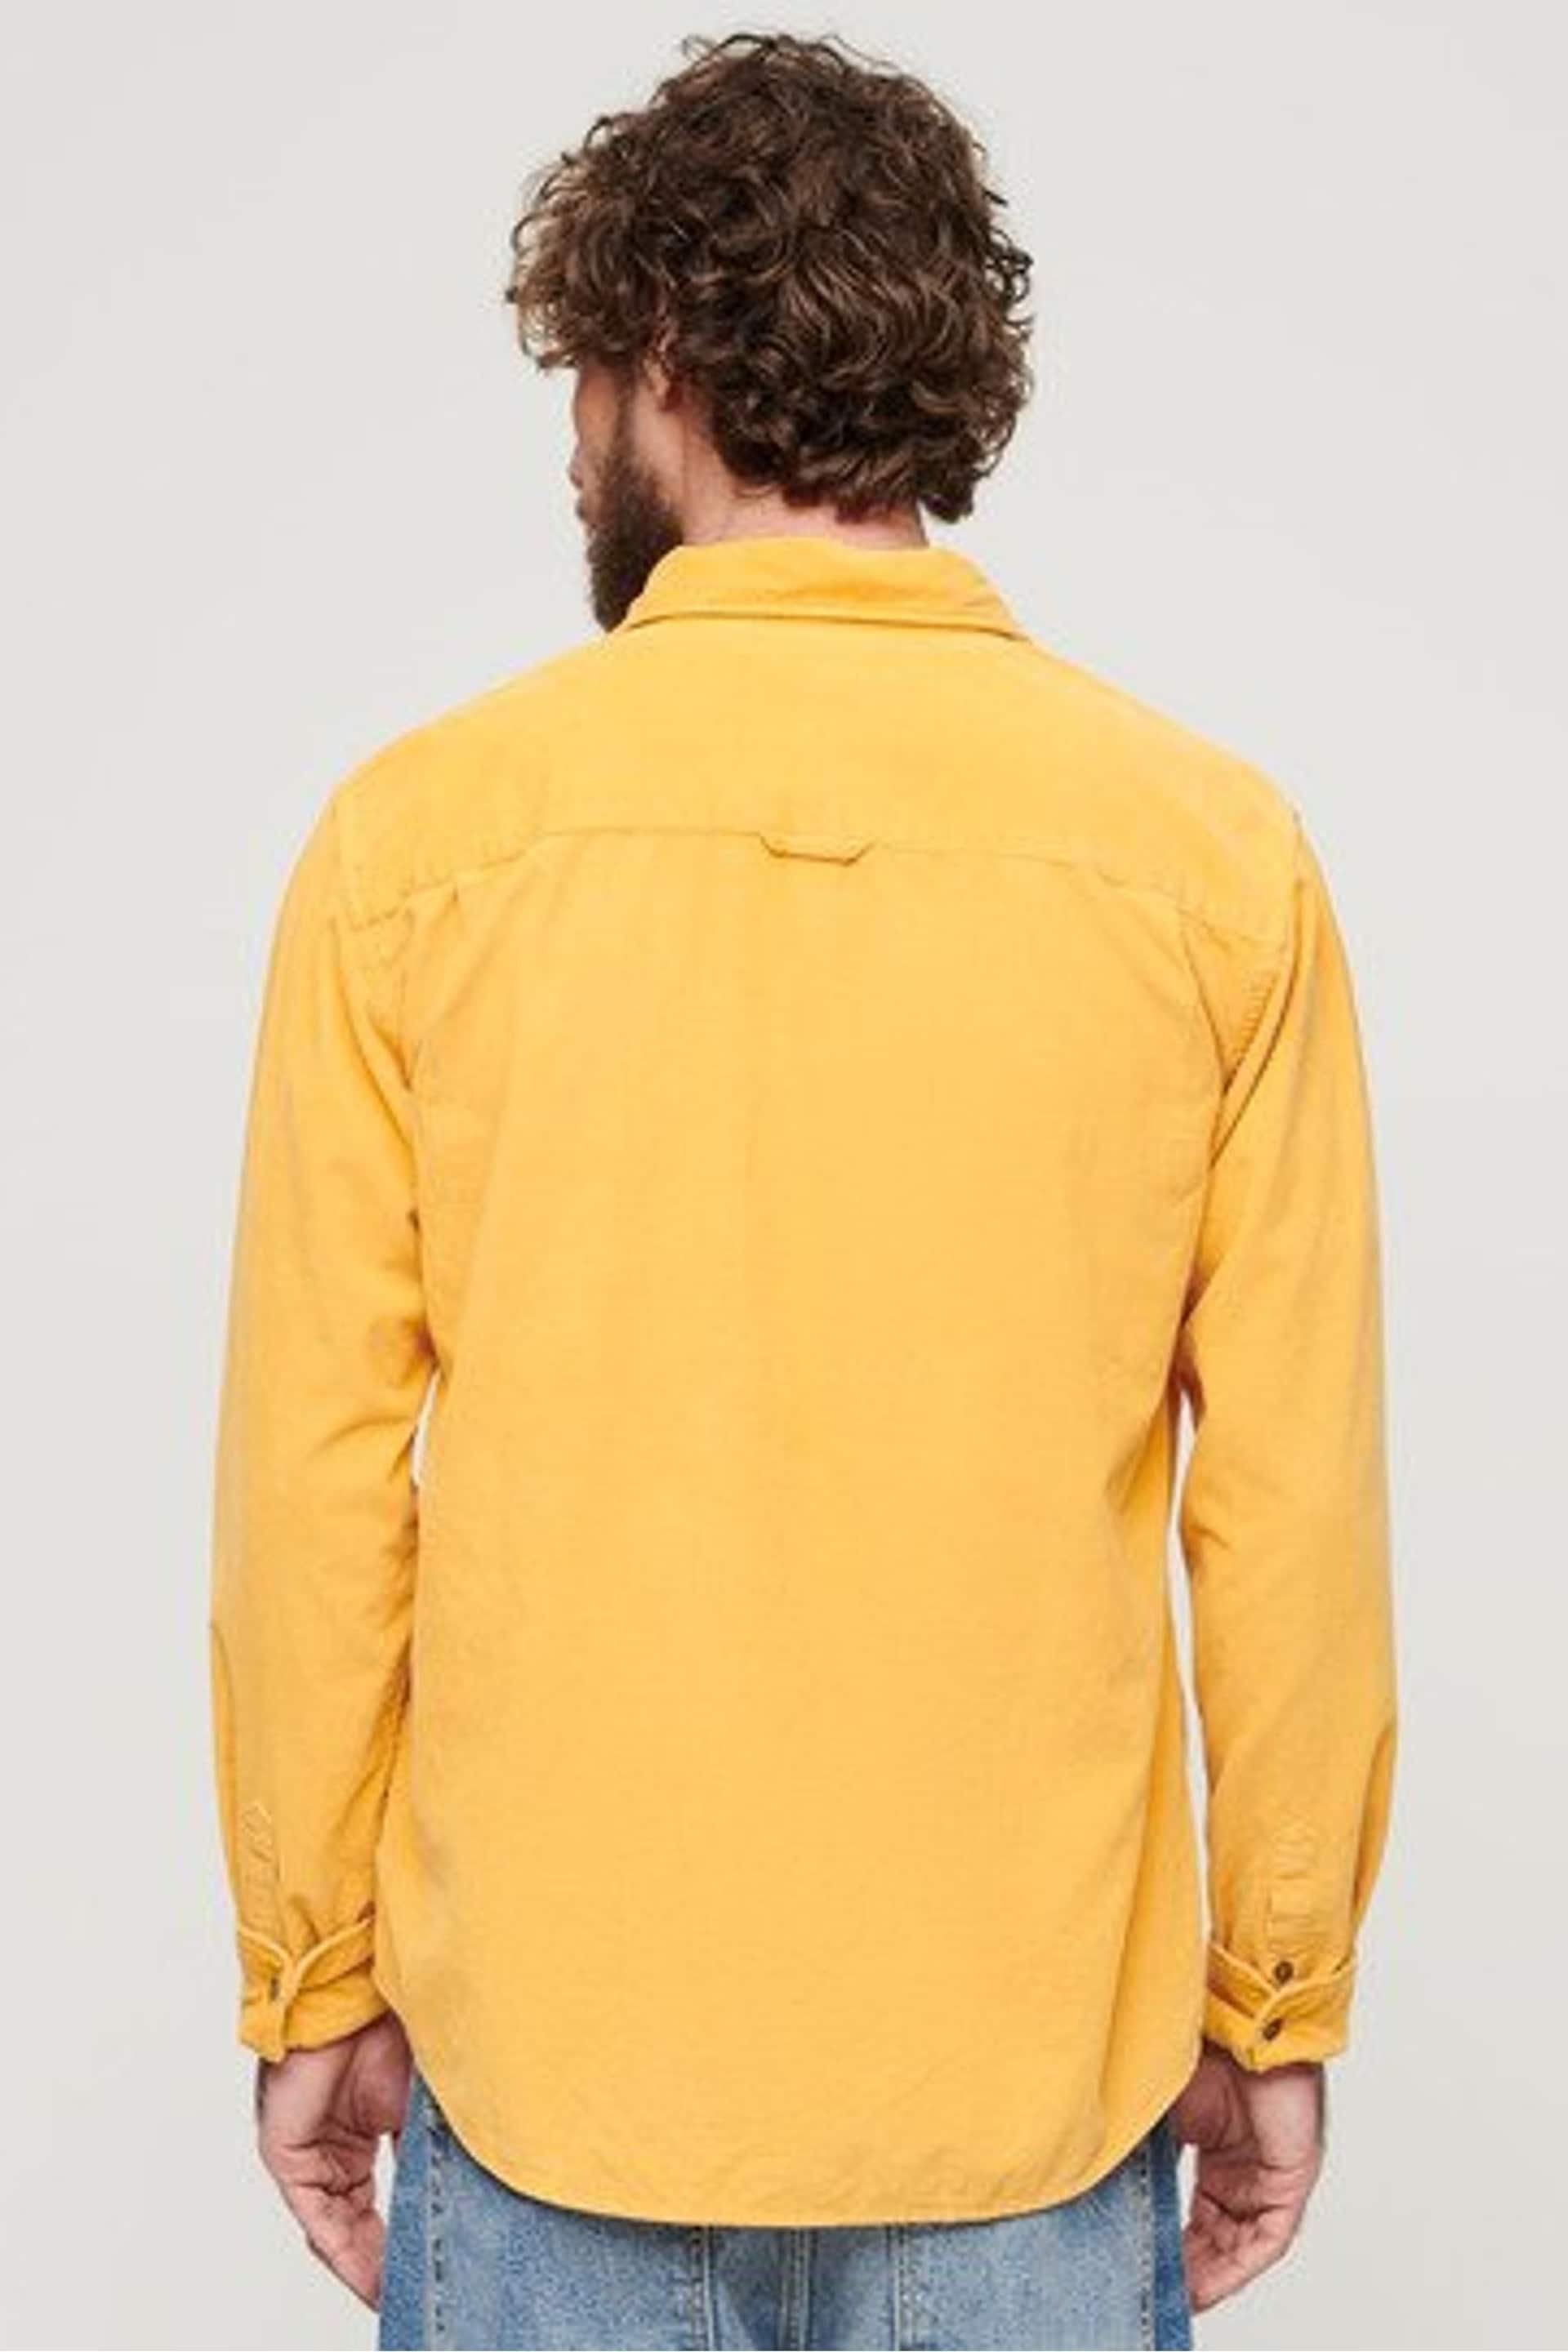 Superdry Yellow Micro Cord Long Sleeve Shirt - Image 2 of 6